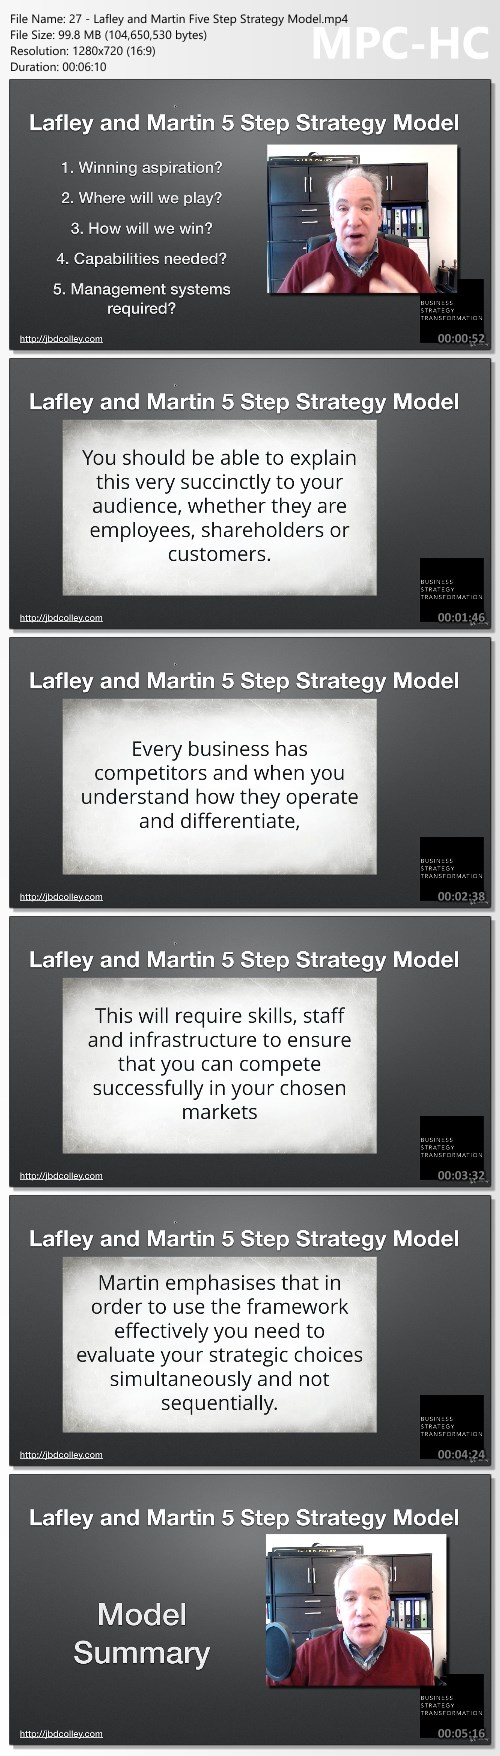 Mini Mba: Business Strategy 2 Business Plan by John Colley MBA, MA(Cantab)